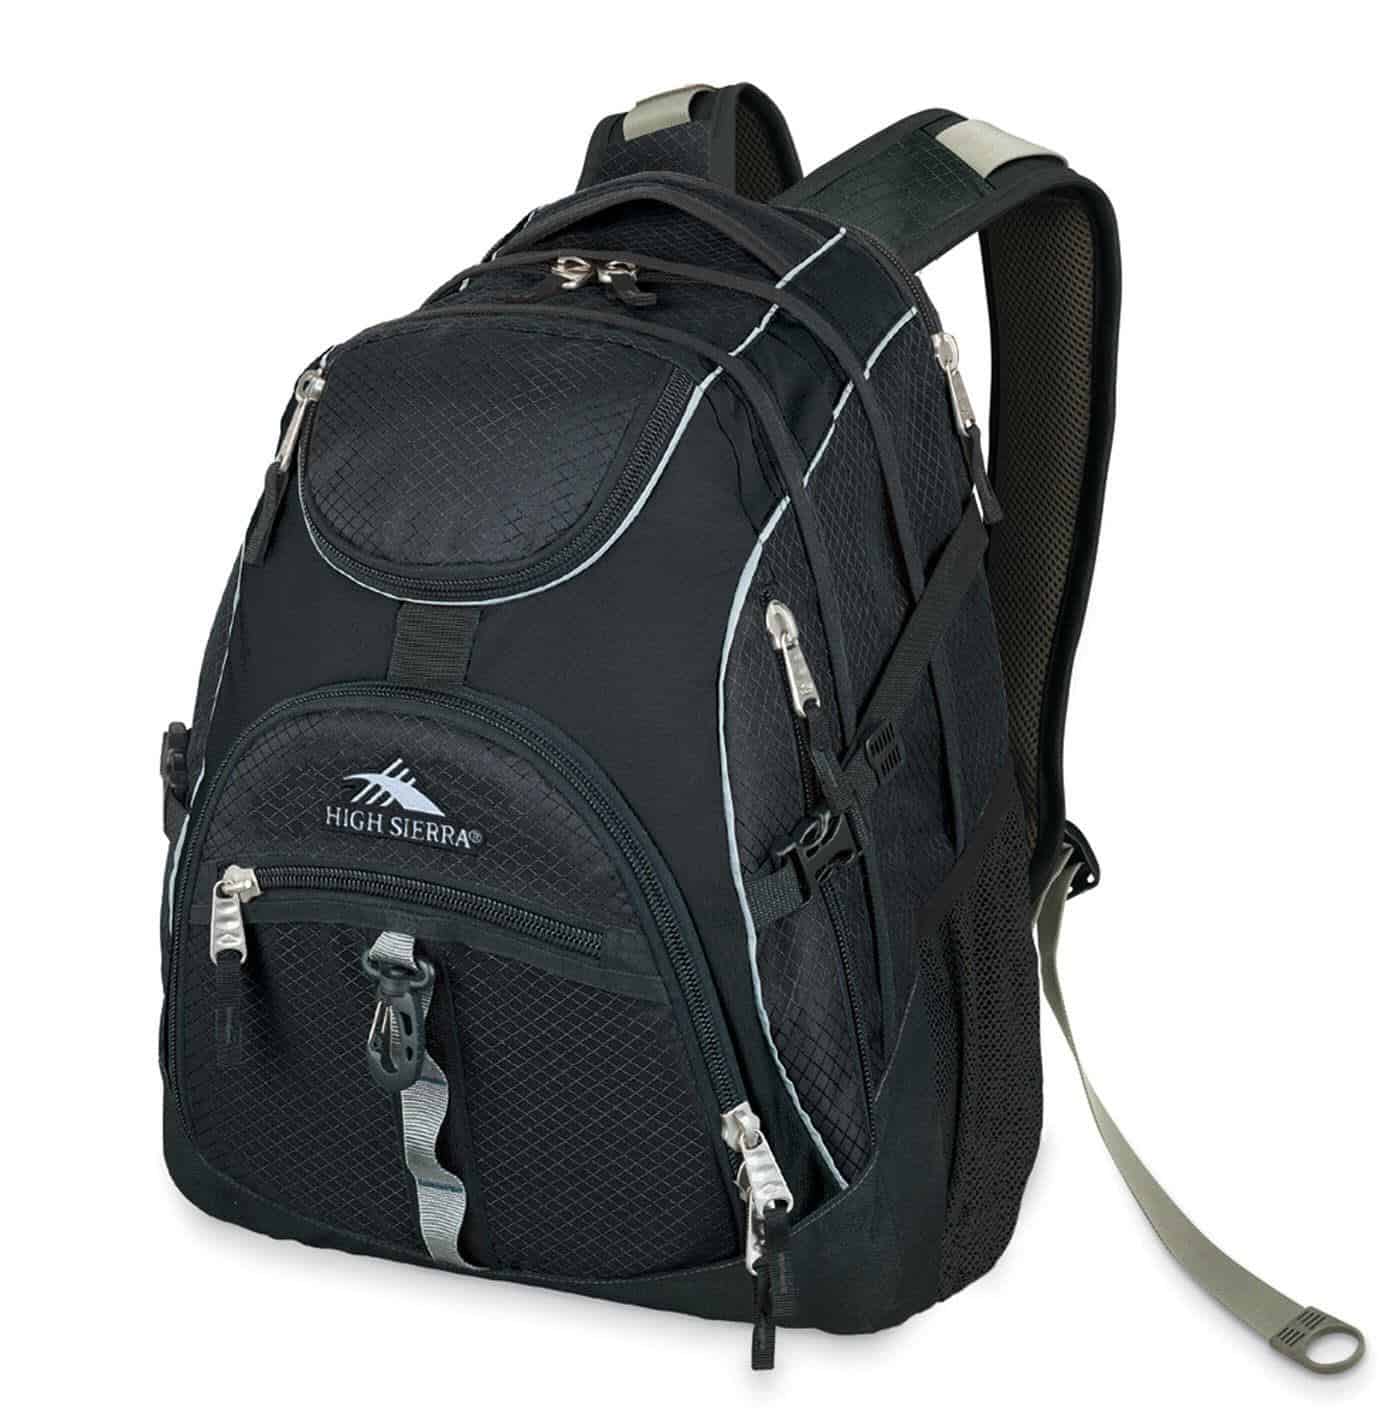 High Sierra Access Laptop Backpack Review